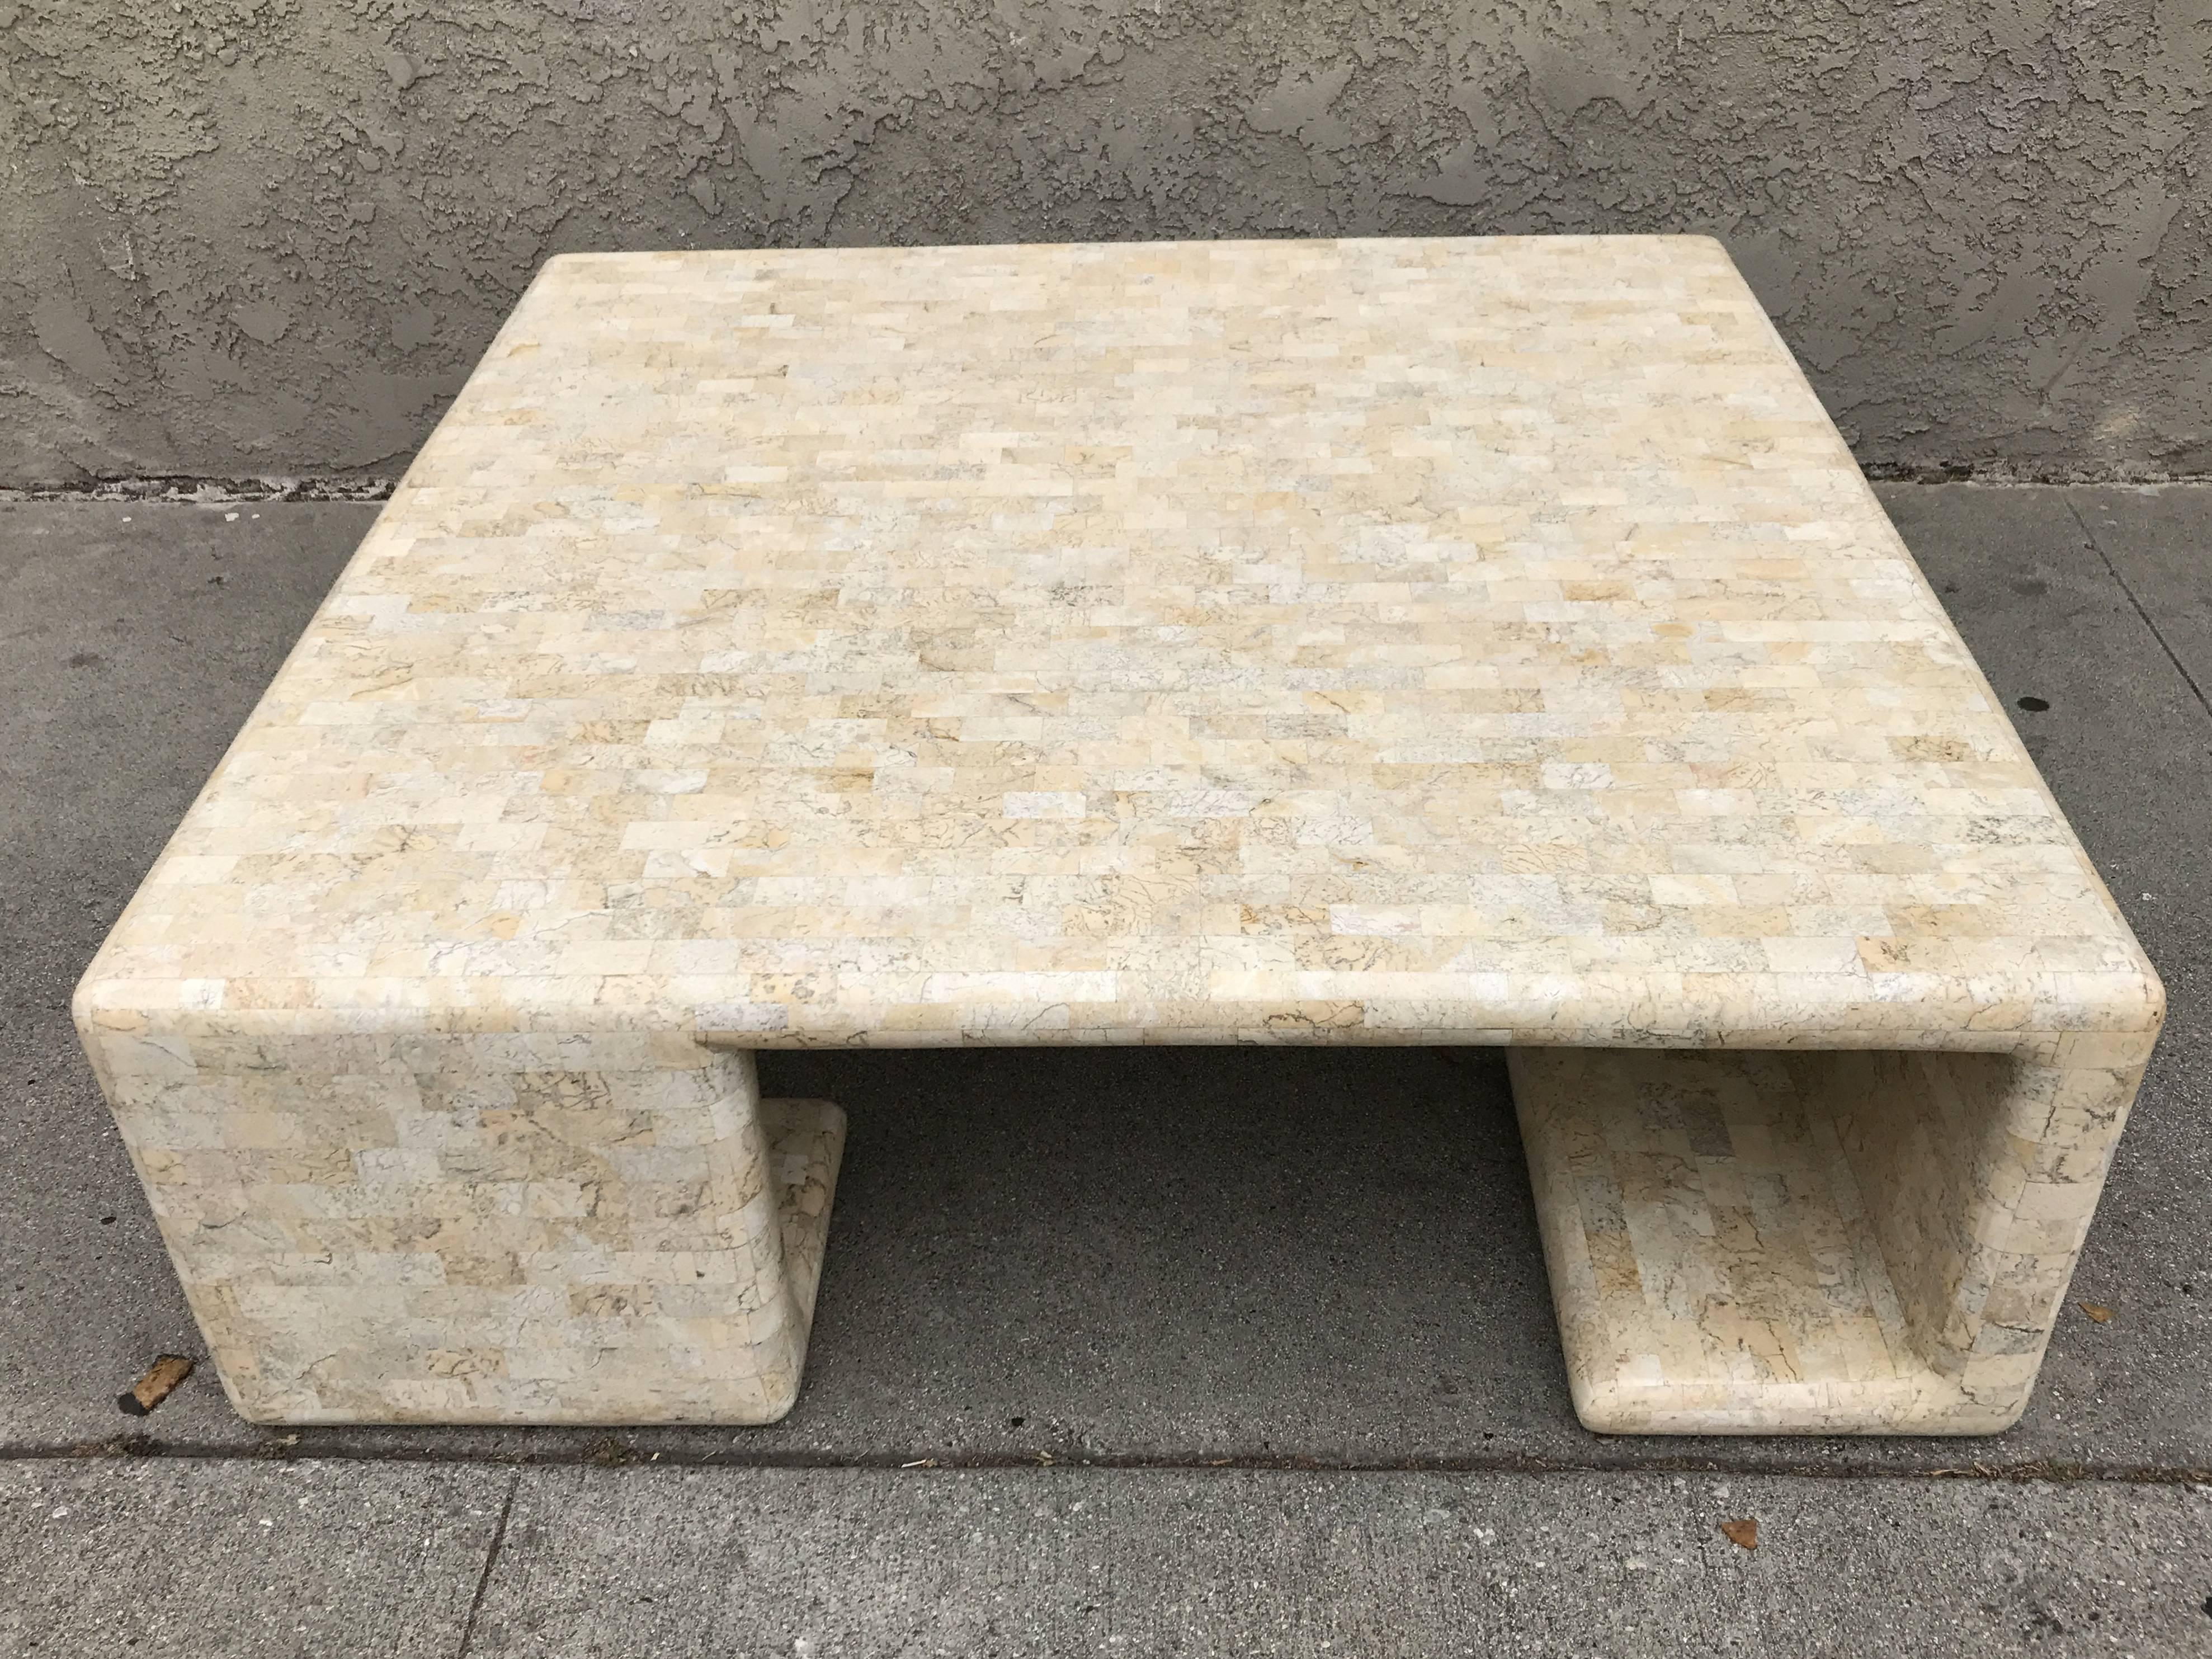 This coffee table by Maitland-Smith is made of tessellated fossil stone and its very unique legs bend under in alternating directions. The table is labelled "Designed and Handmade in Cebu, Philippines by Maitland-Smith, Ltd".